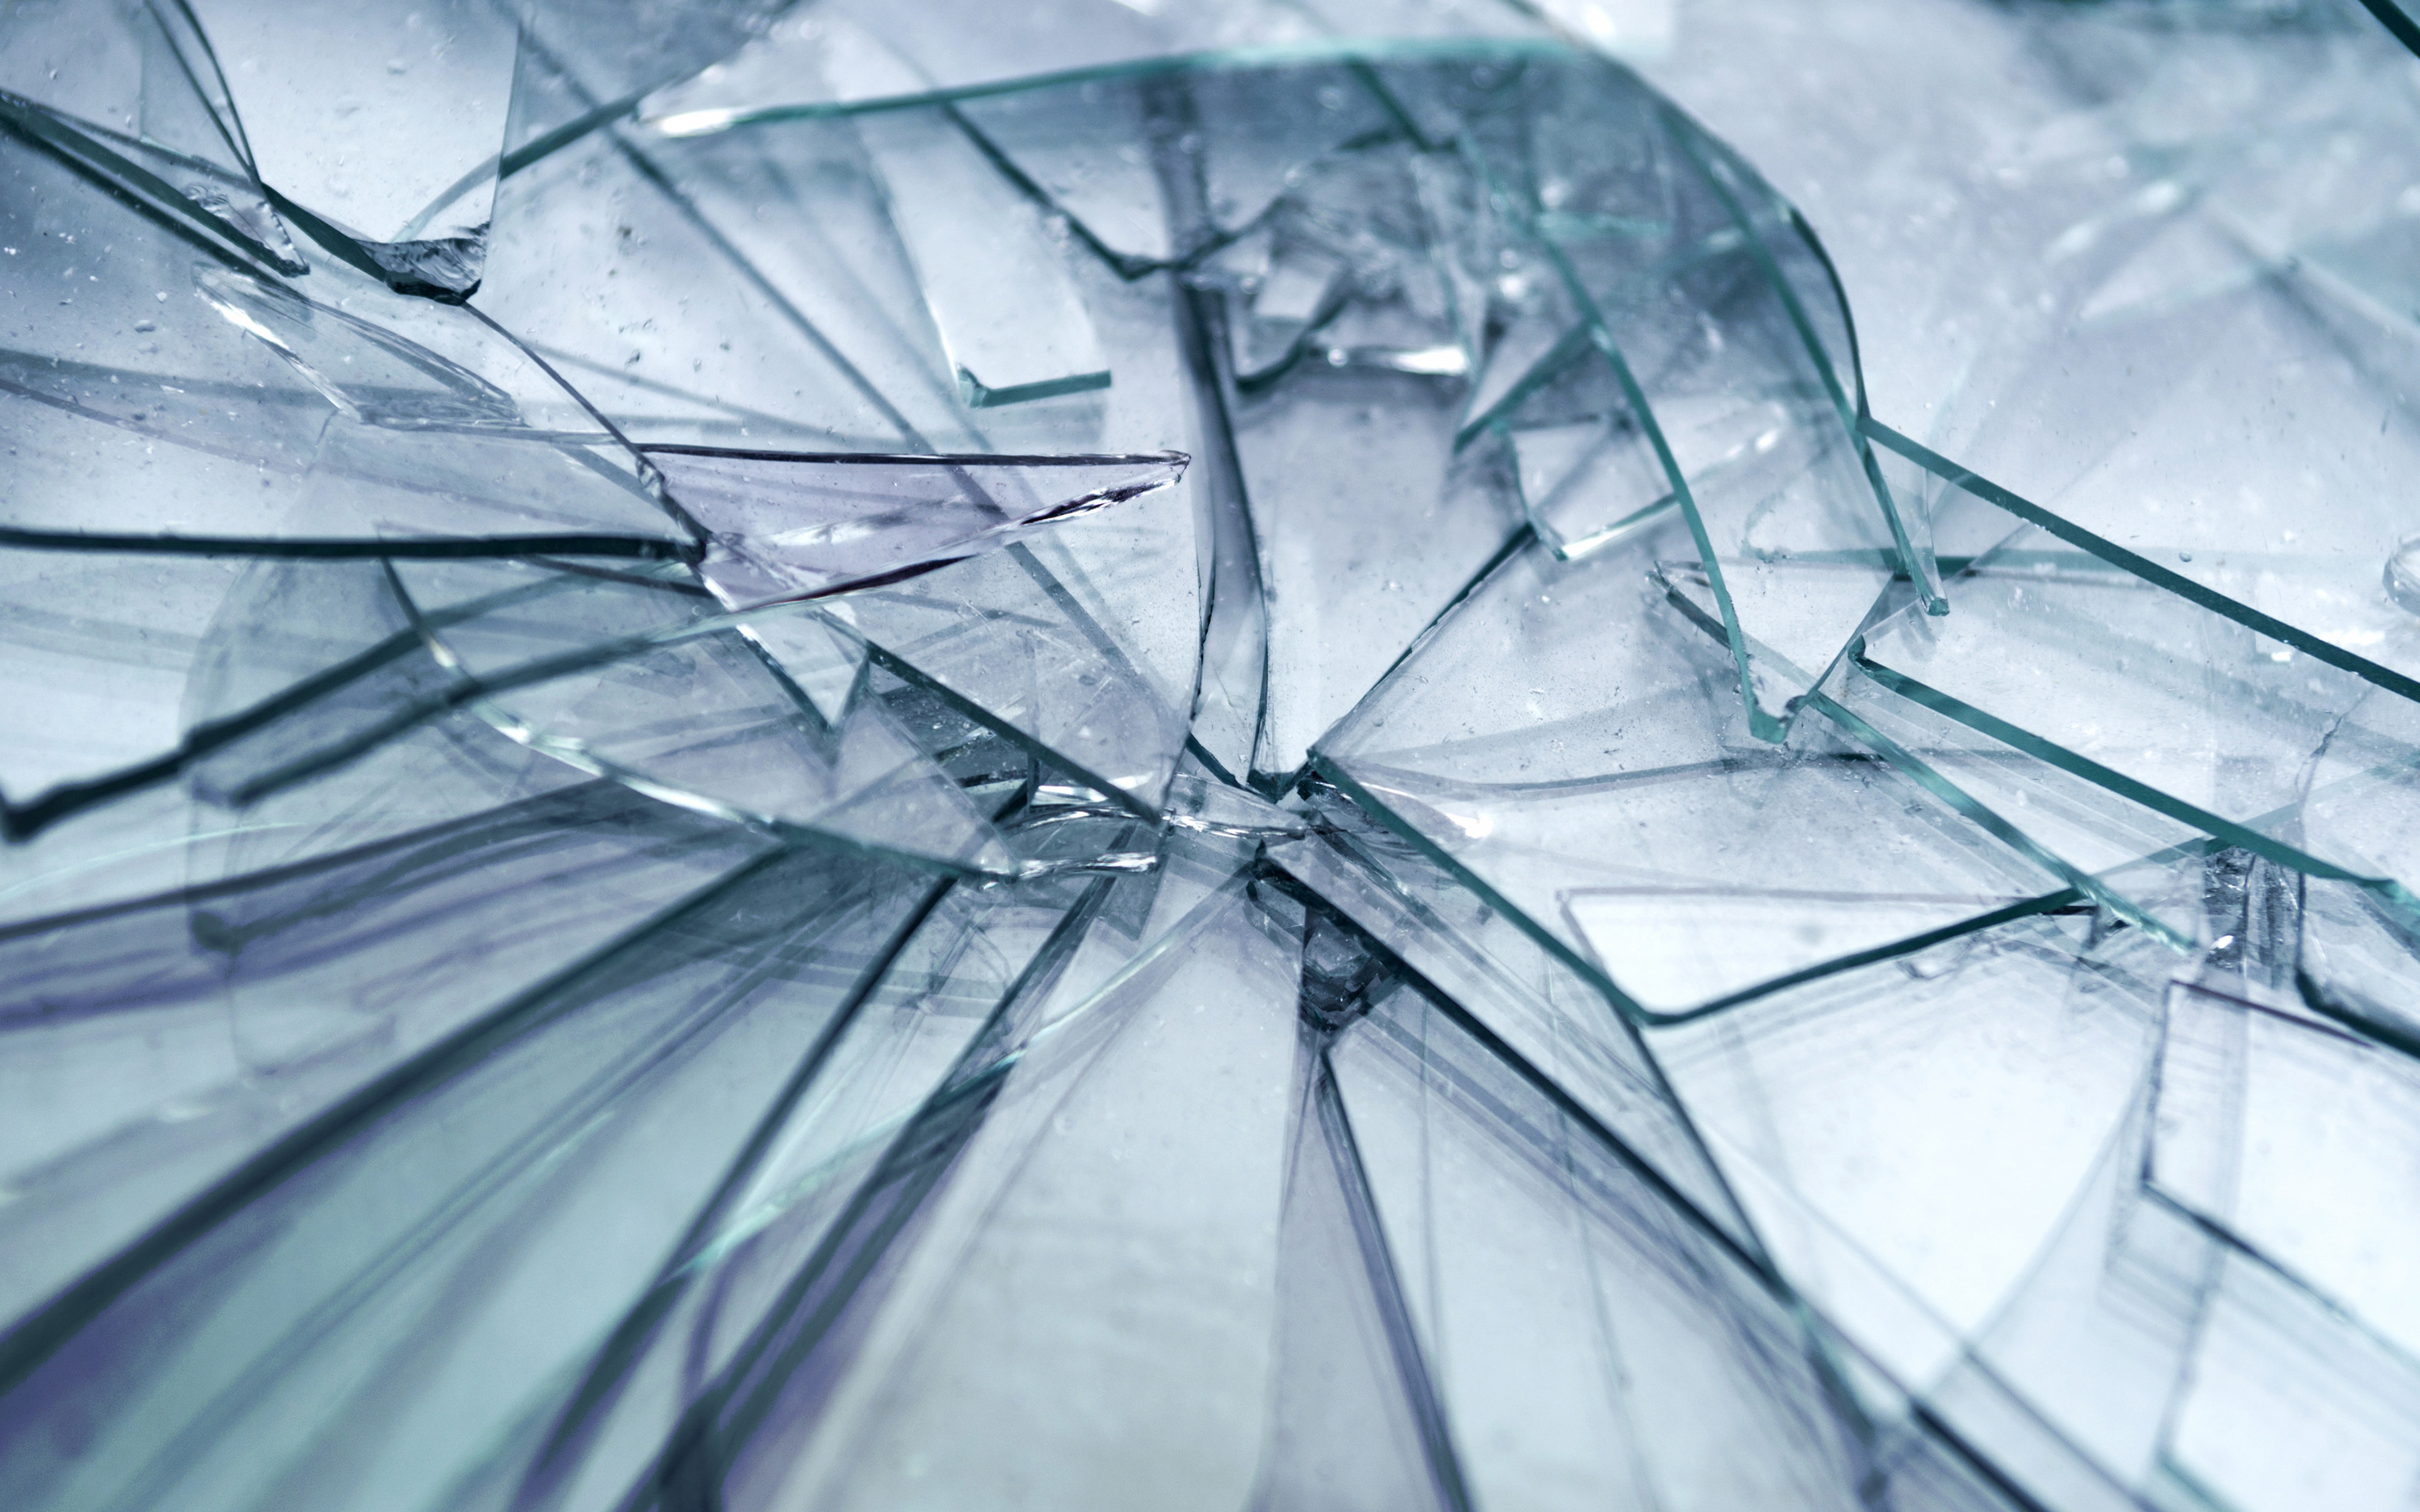 Download wallpaper shards of glass, 4k, broken glass, glass splinters, broken glass textures, glass textures, glass for desktop with resolution 3840x2400. High Quality HD picture wallpaper